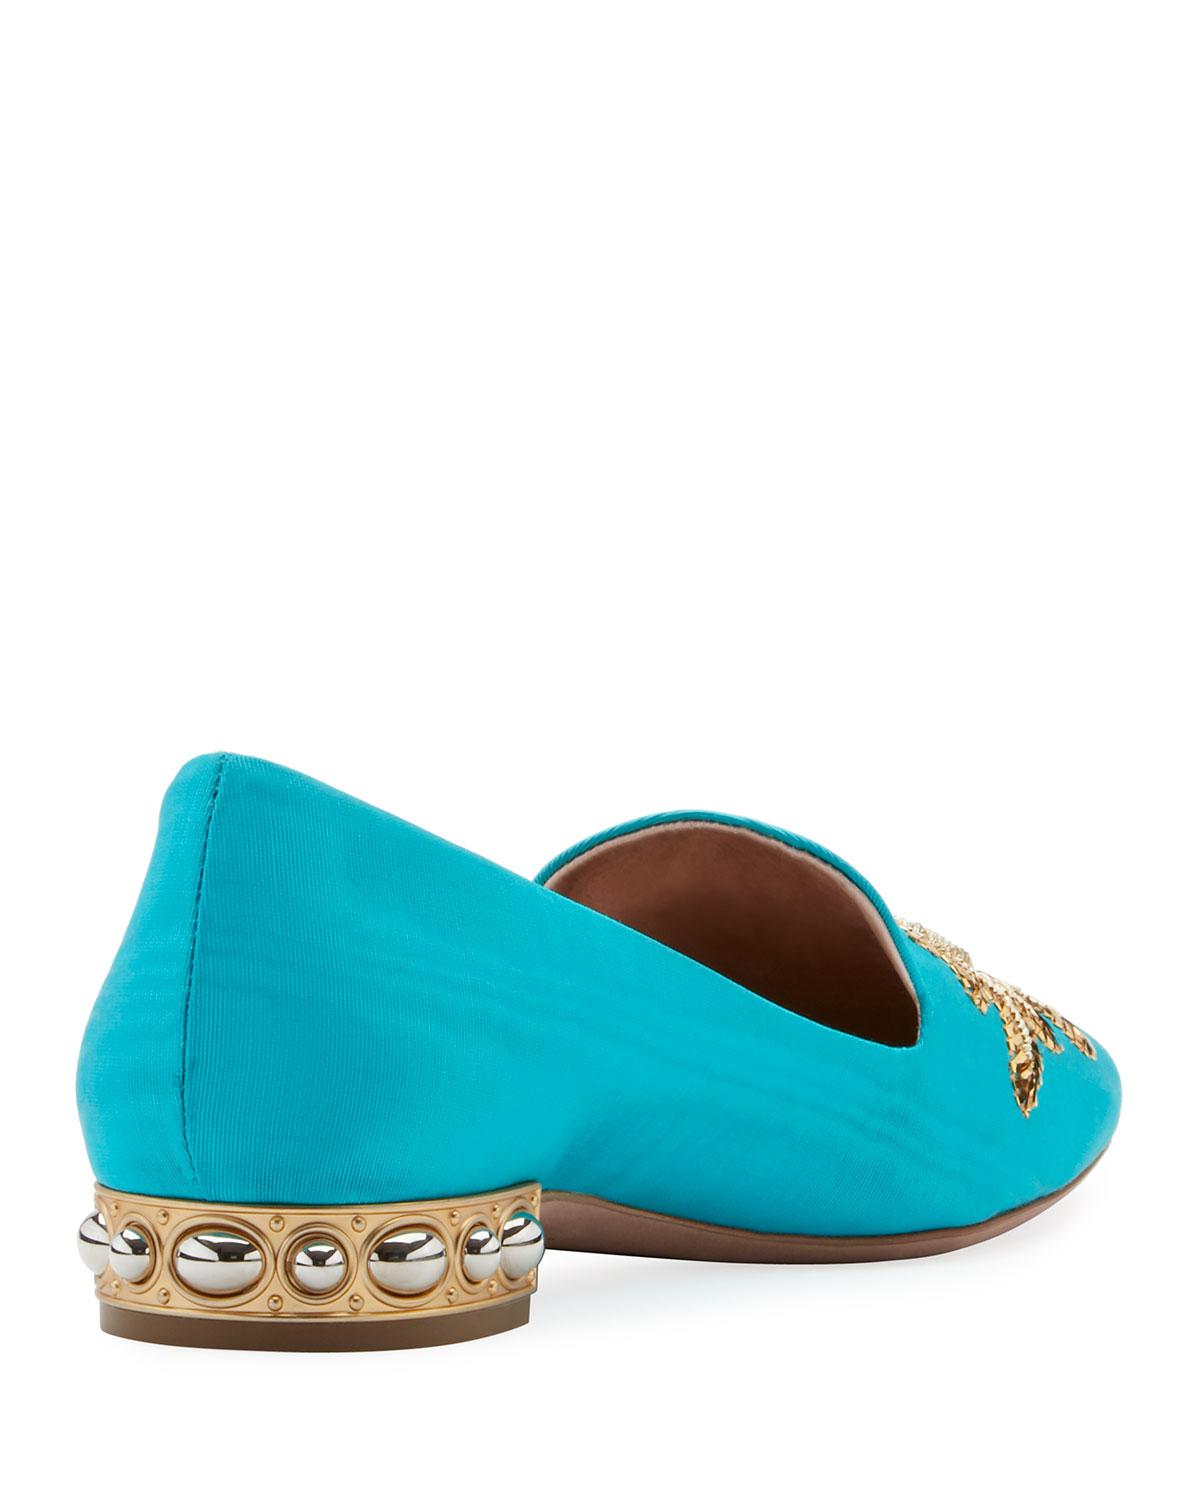 Aquazzura Embroidered Moire Loafer in Blue - Lyst